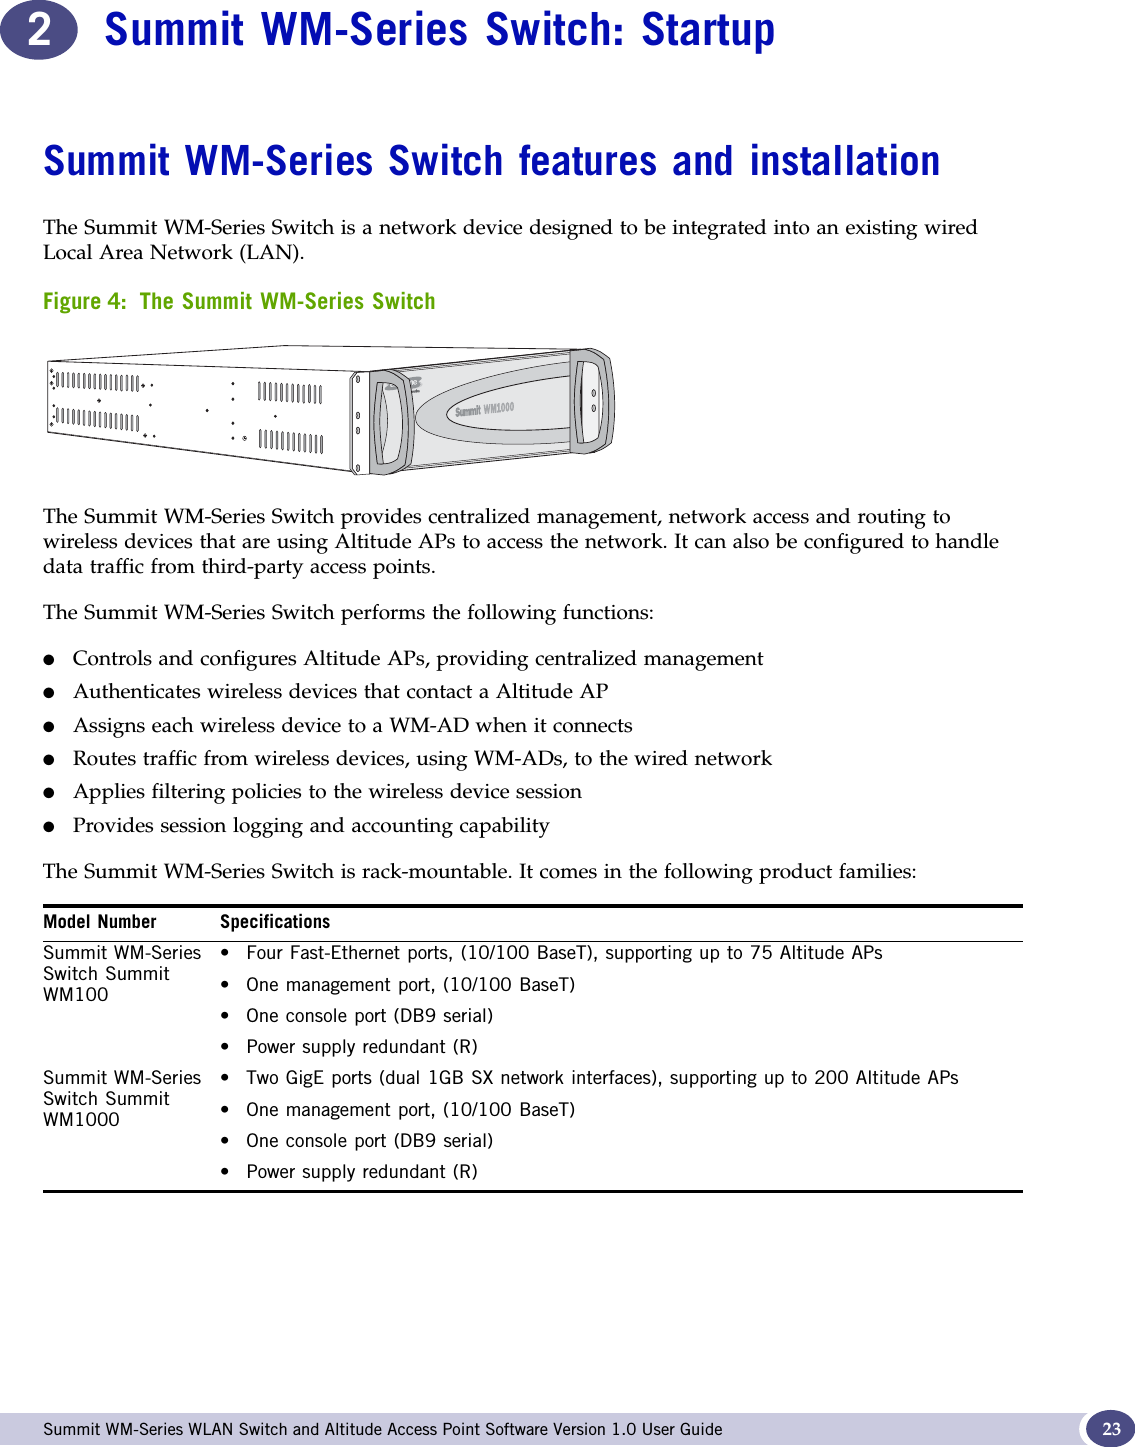  Summit WM-Series WLAN Switch and Altitude Access Point Software Version 1.0 User Guide 232Summit WM-Series Switch: StartupSummit WM-Series Switch features and installationThe Summit WM-Series Switch is a network device designed to be integrated into an existing wired Local Area Network (LAN). Figure 4: The Summit WM-Series SwitchThe Summit WM-Series Switch provides centralized management, network access and routing to wireless devices that are using Altitude APs to access the network. It can also be configured to handle data traffic from third-party access points.The Summit WM-Series Switch performs the following functions:●Controls and configures Altitude APs, providing centralized management●Authenticates wireless devices that contact a Altitude AP●Assigns each wireless device to a WM-AD when it connects●Routes traffic from wireless devices, using WM-ADs, to the wired network●Applies filtering policies to the wireless device session●Provides session logging and accounting capabilityThe Summit WM-Series Switch is rack-mountable. It comes in the following product families:Model Number SpecificationsSummit WM-Series Switch Summit WM100• Four Fast-Ethernet ports, (10/100 BaseT), supporting up to 75 Altitude APs• One management port, (10/100 BaseT)• One console port (DB9 serial)• Power supply redundant (R)Summit WM-Series Switch Summit WM1000• Two GigE ports (dual 1GB SX network interfaces), supporting up to 200 Altitude APs• One management port, (10/100 BaseT)• One console port (DB9 serial) • Power supply redundant (R)